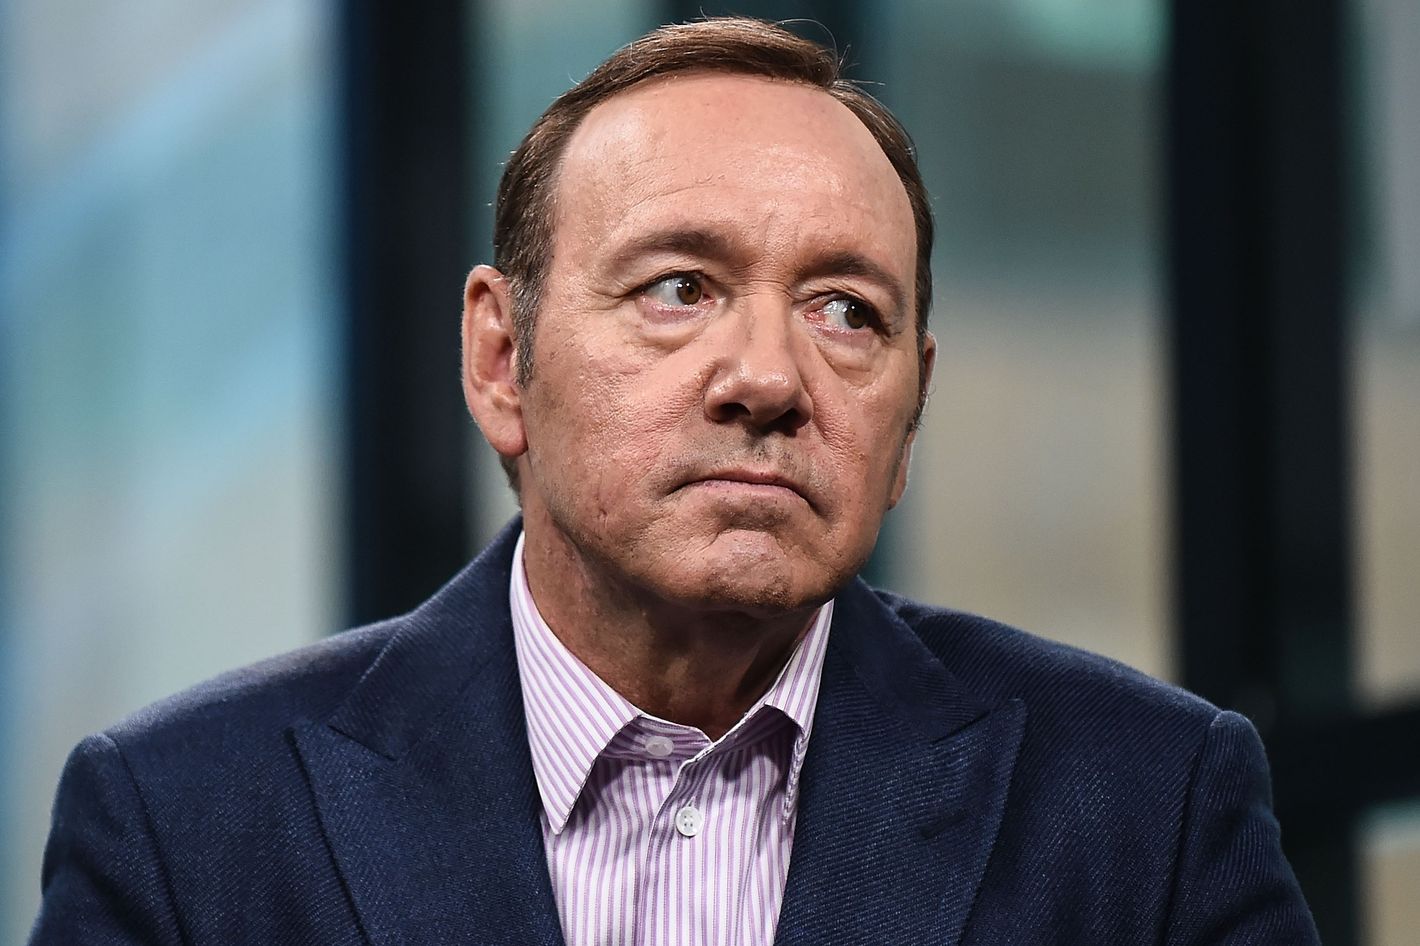 Kevin Spacey Man Alleges Sexual Relationship at 14 pic